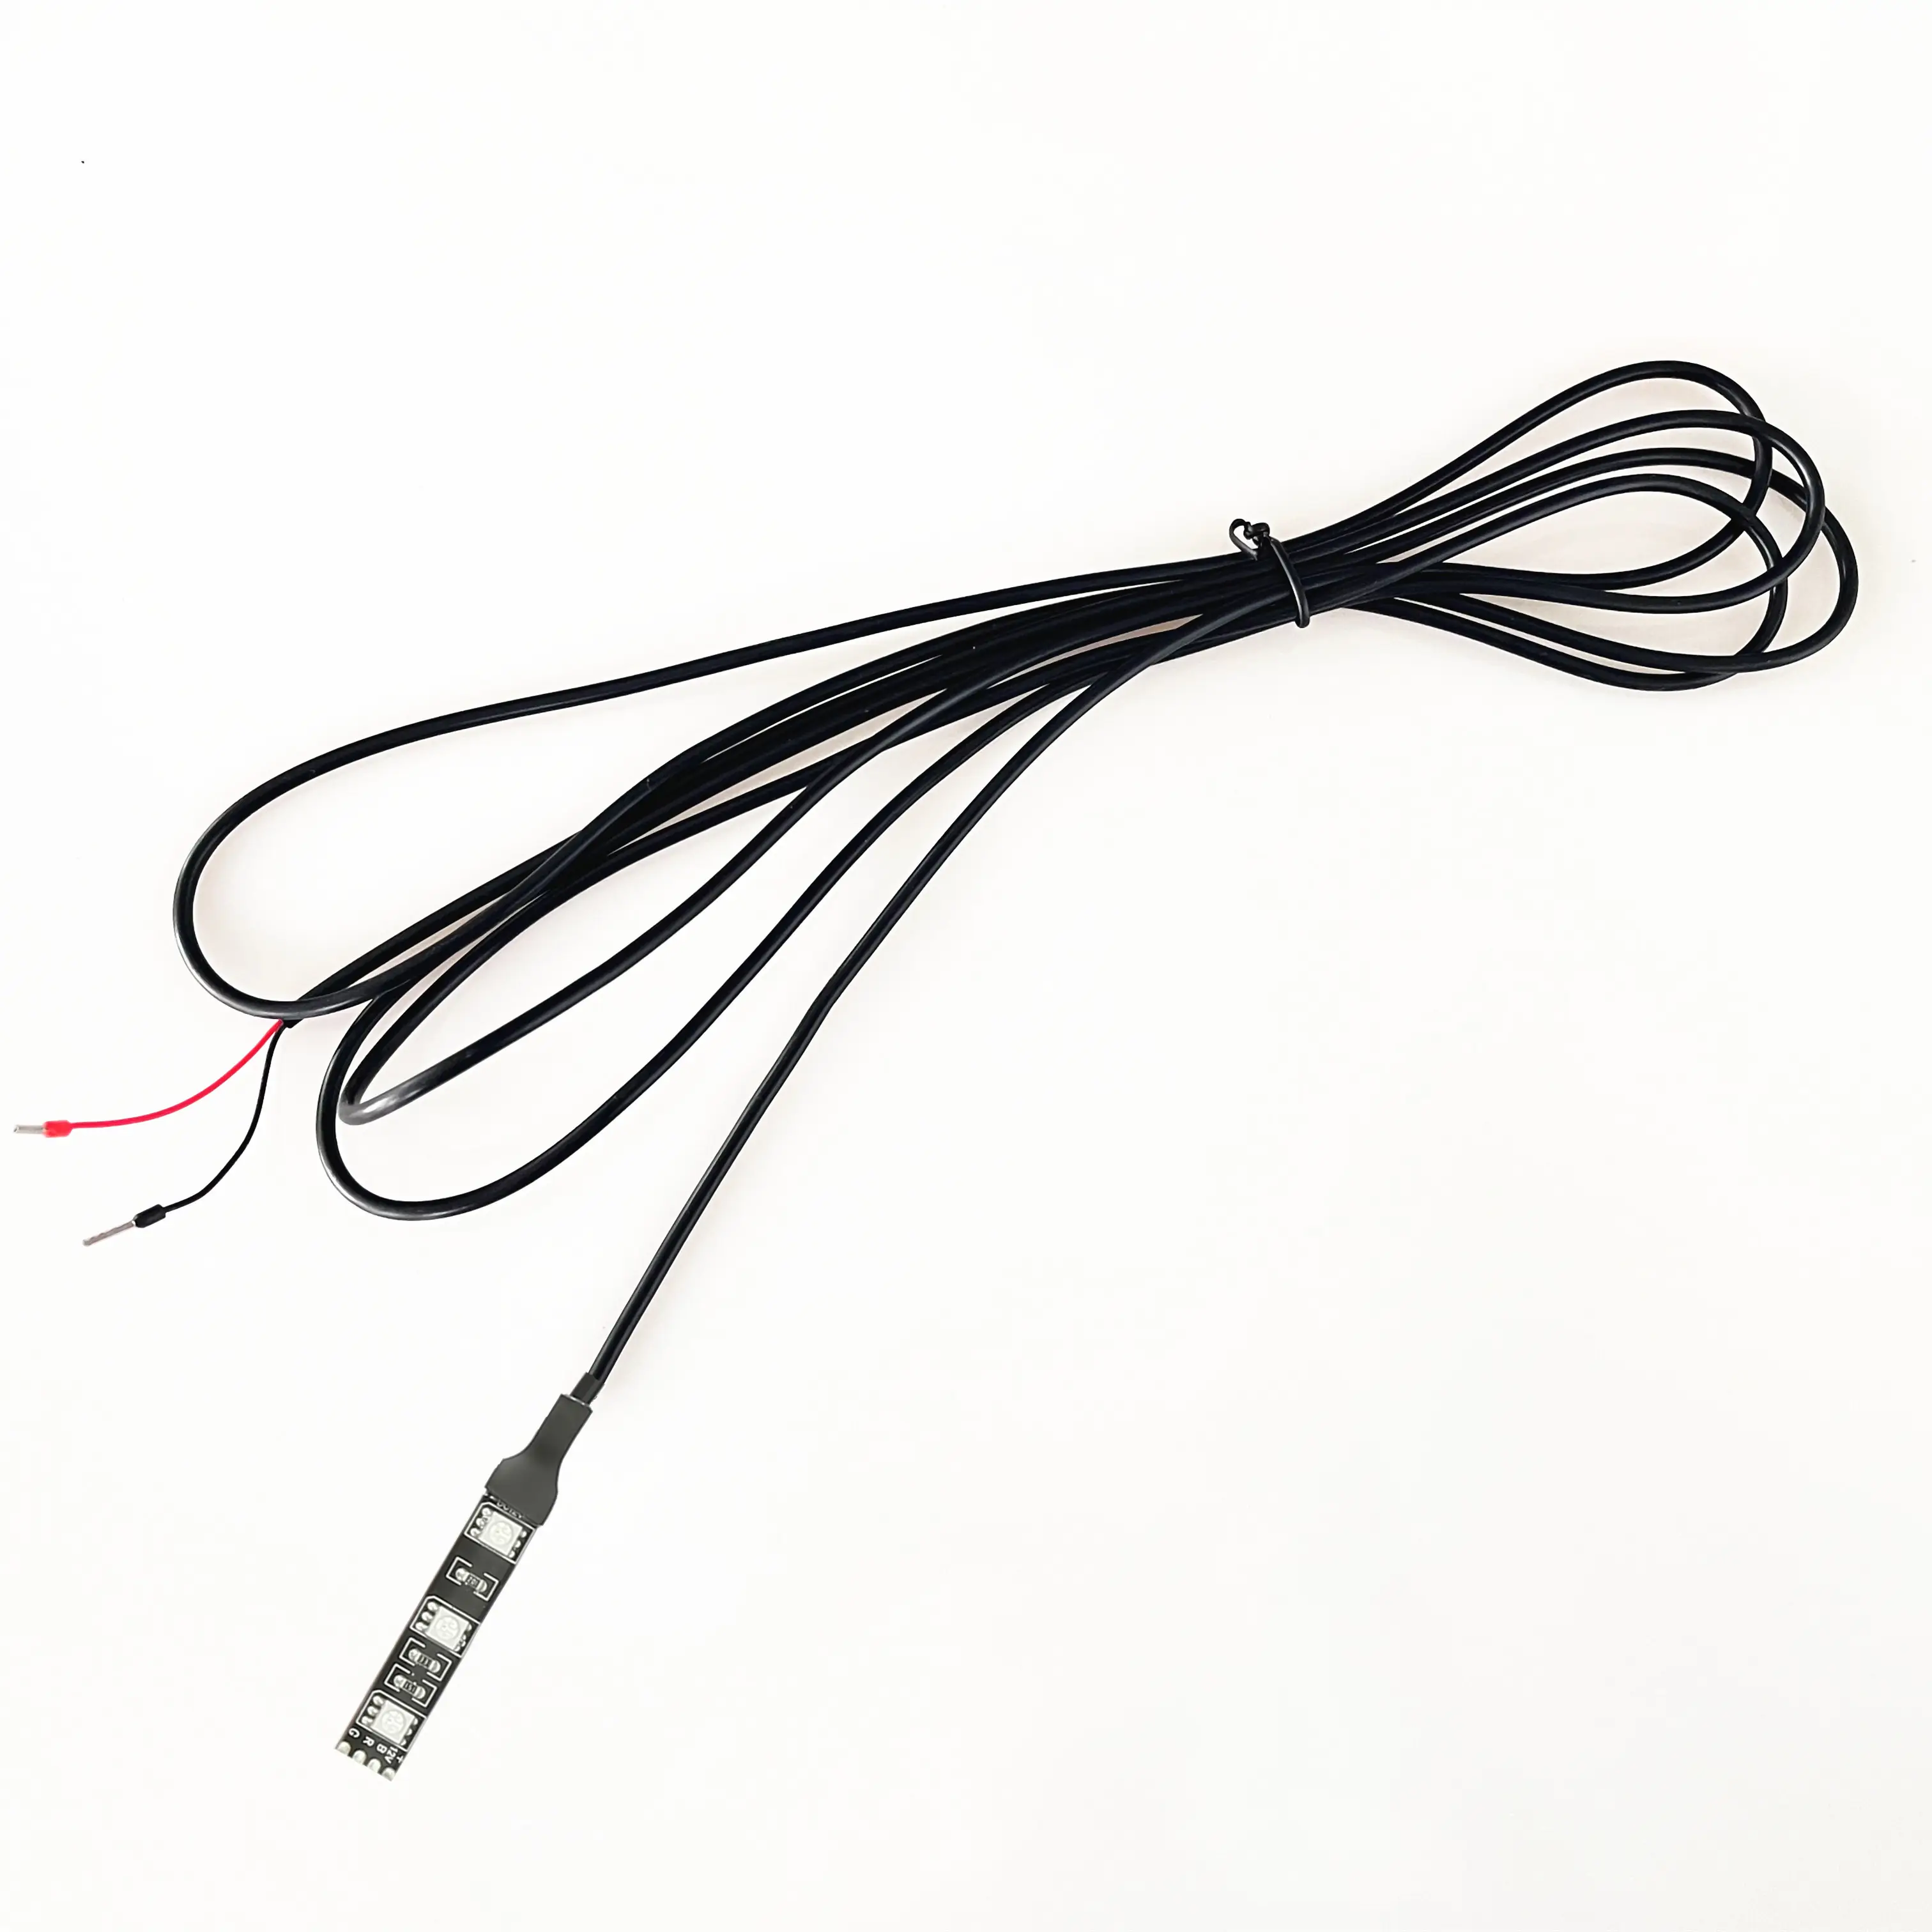 12V 3LED 9 Chip Red Color LED Strip Pod Light with 8 FT Wire 2inch Exposed Wire with Crimp Connectors